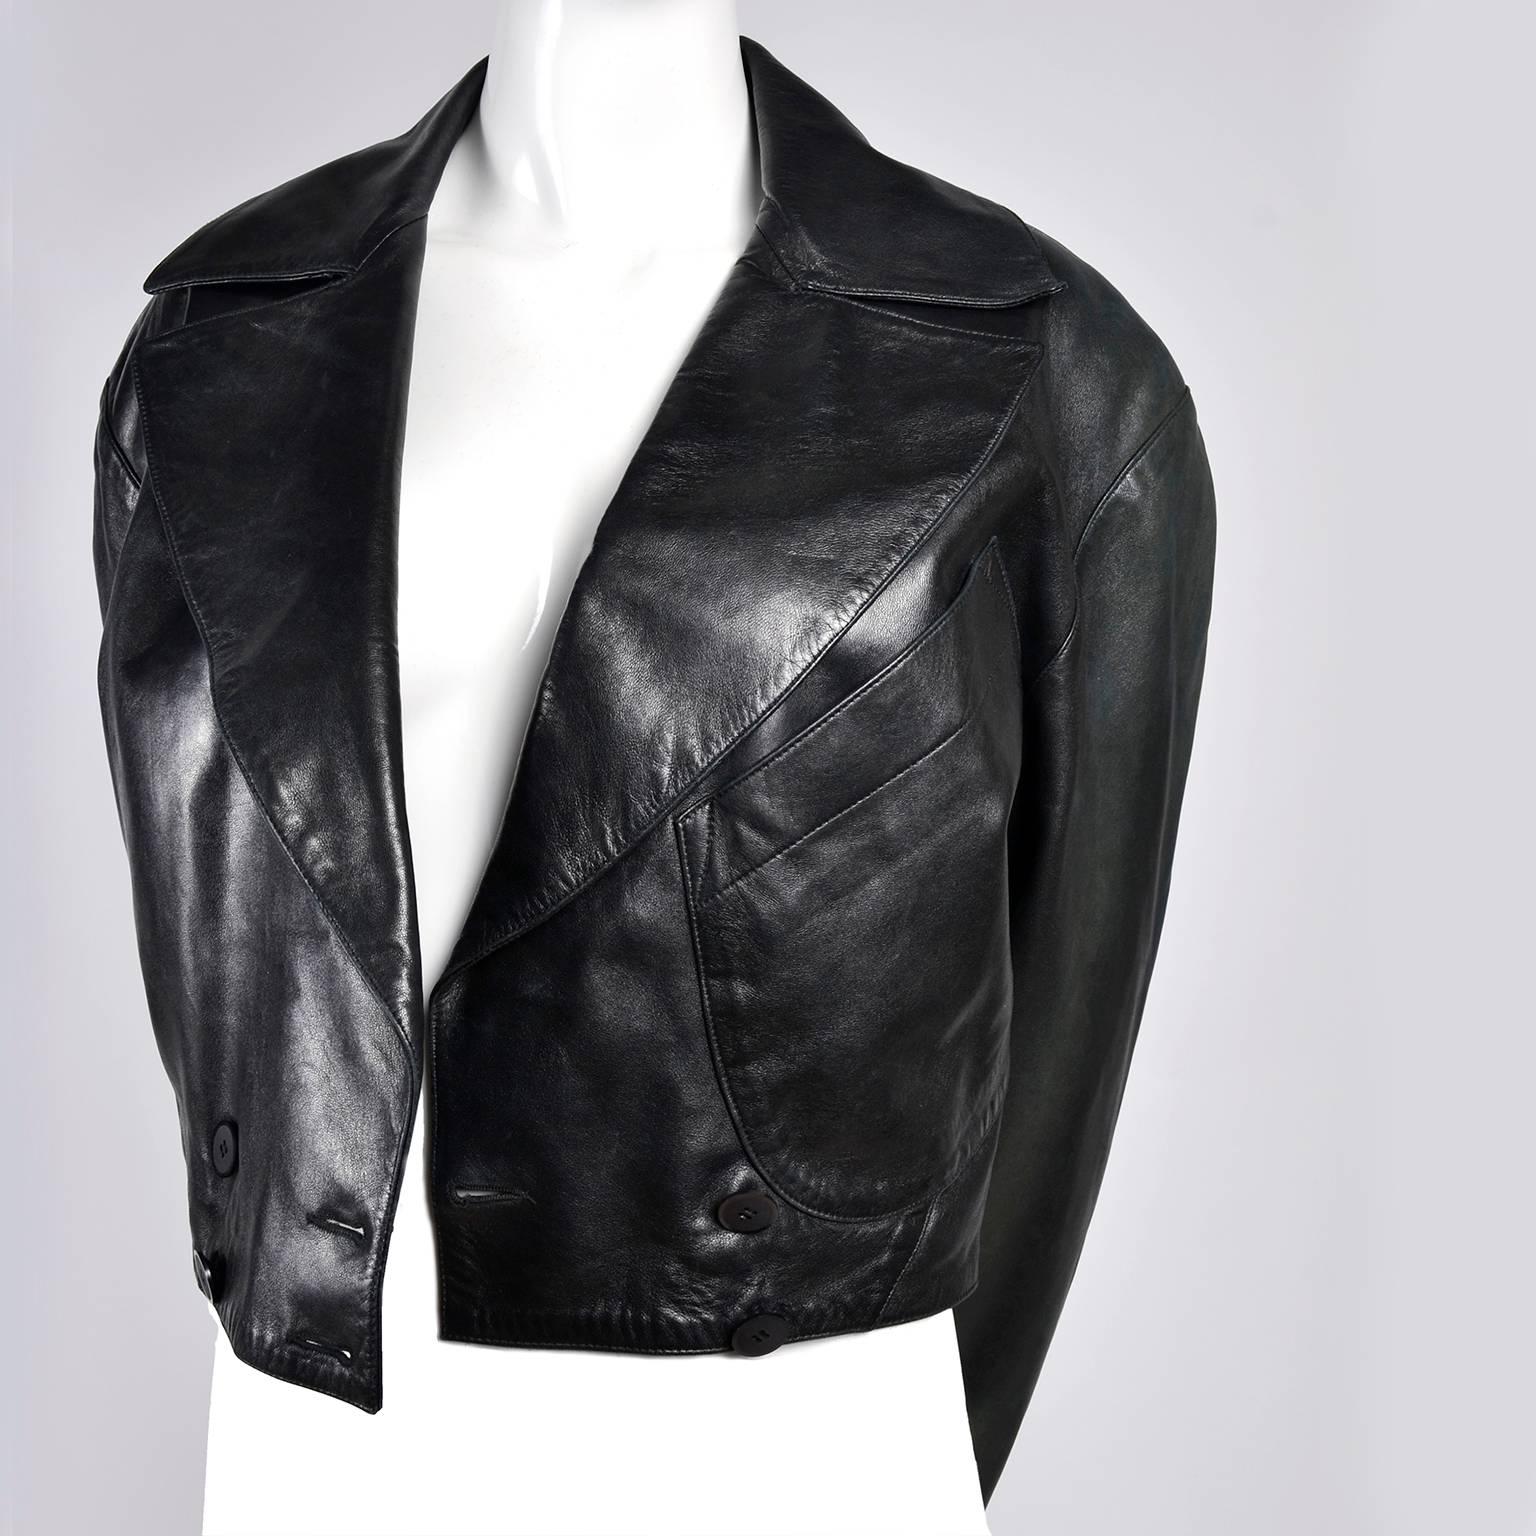 Women's 1980s Azzedine Alaia Vintage Jacket in Black Leather Made in France Size 38 